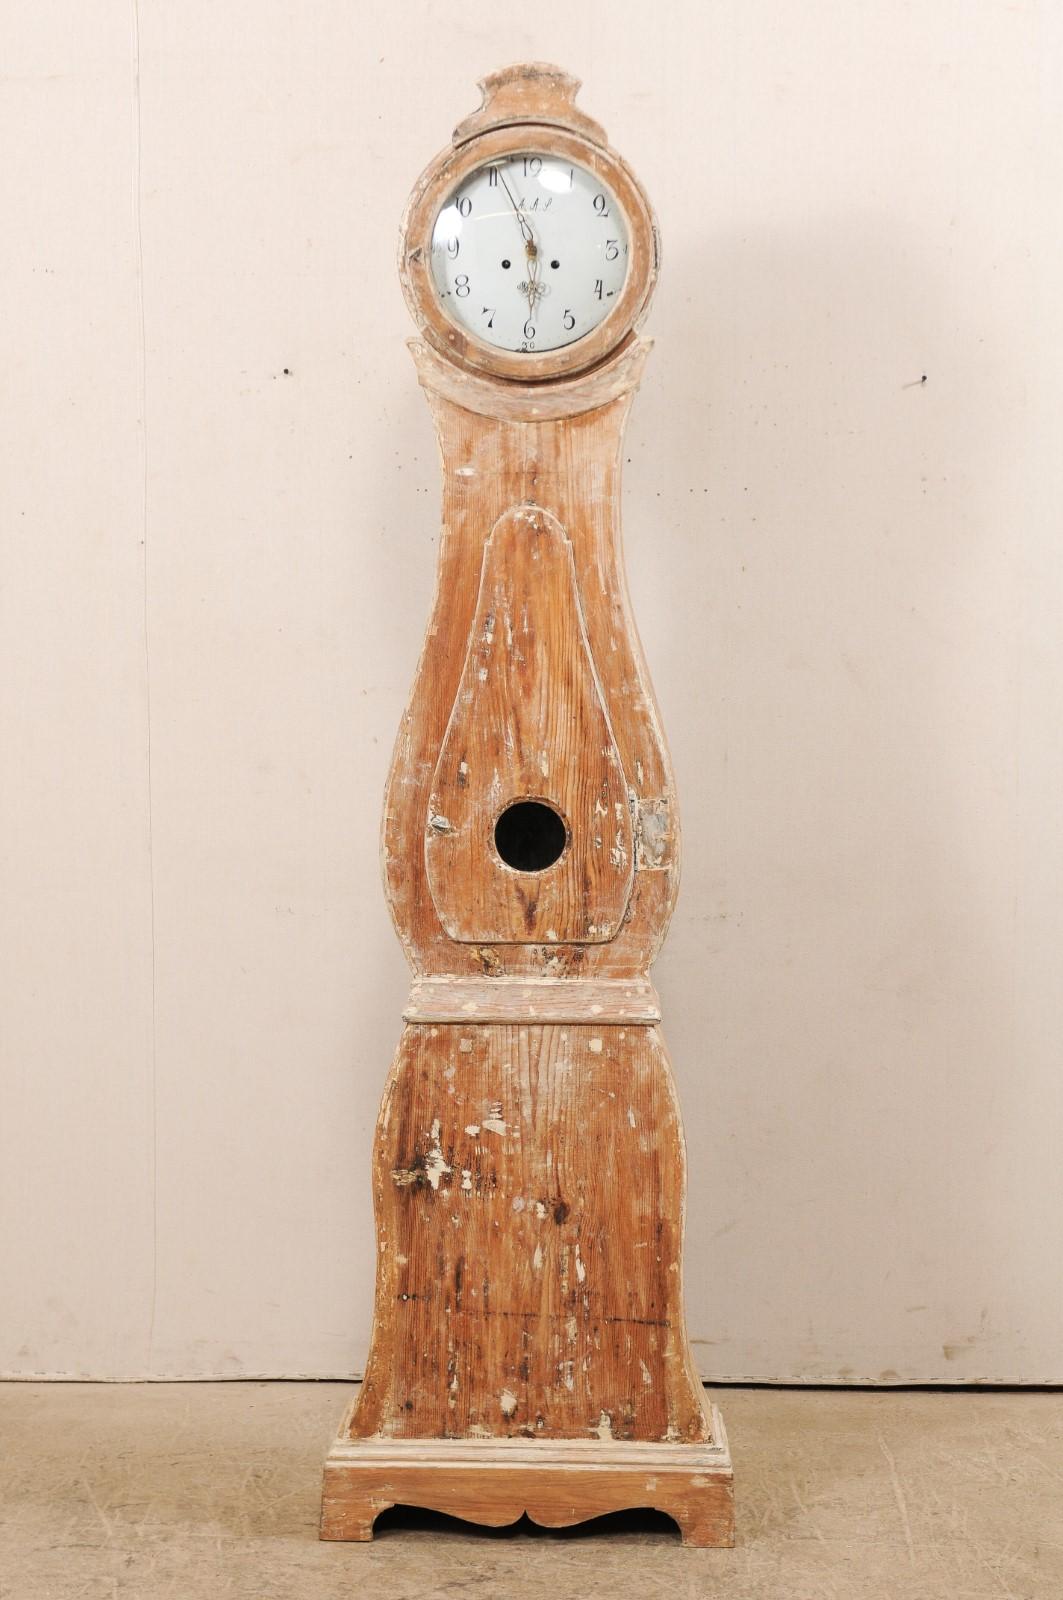 A 19th century Swedish grandfather clock. This antique tall clock from Sweden features a flattened arch shaped raised bonnet atop a round-shaped head, raindrop shaped body, neck and waist are accentuated with trim molding, and the body is supported